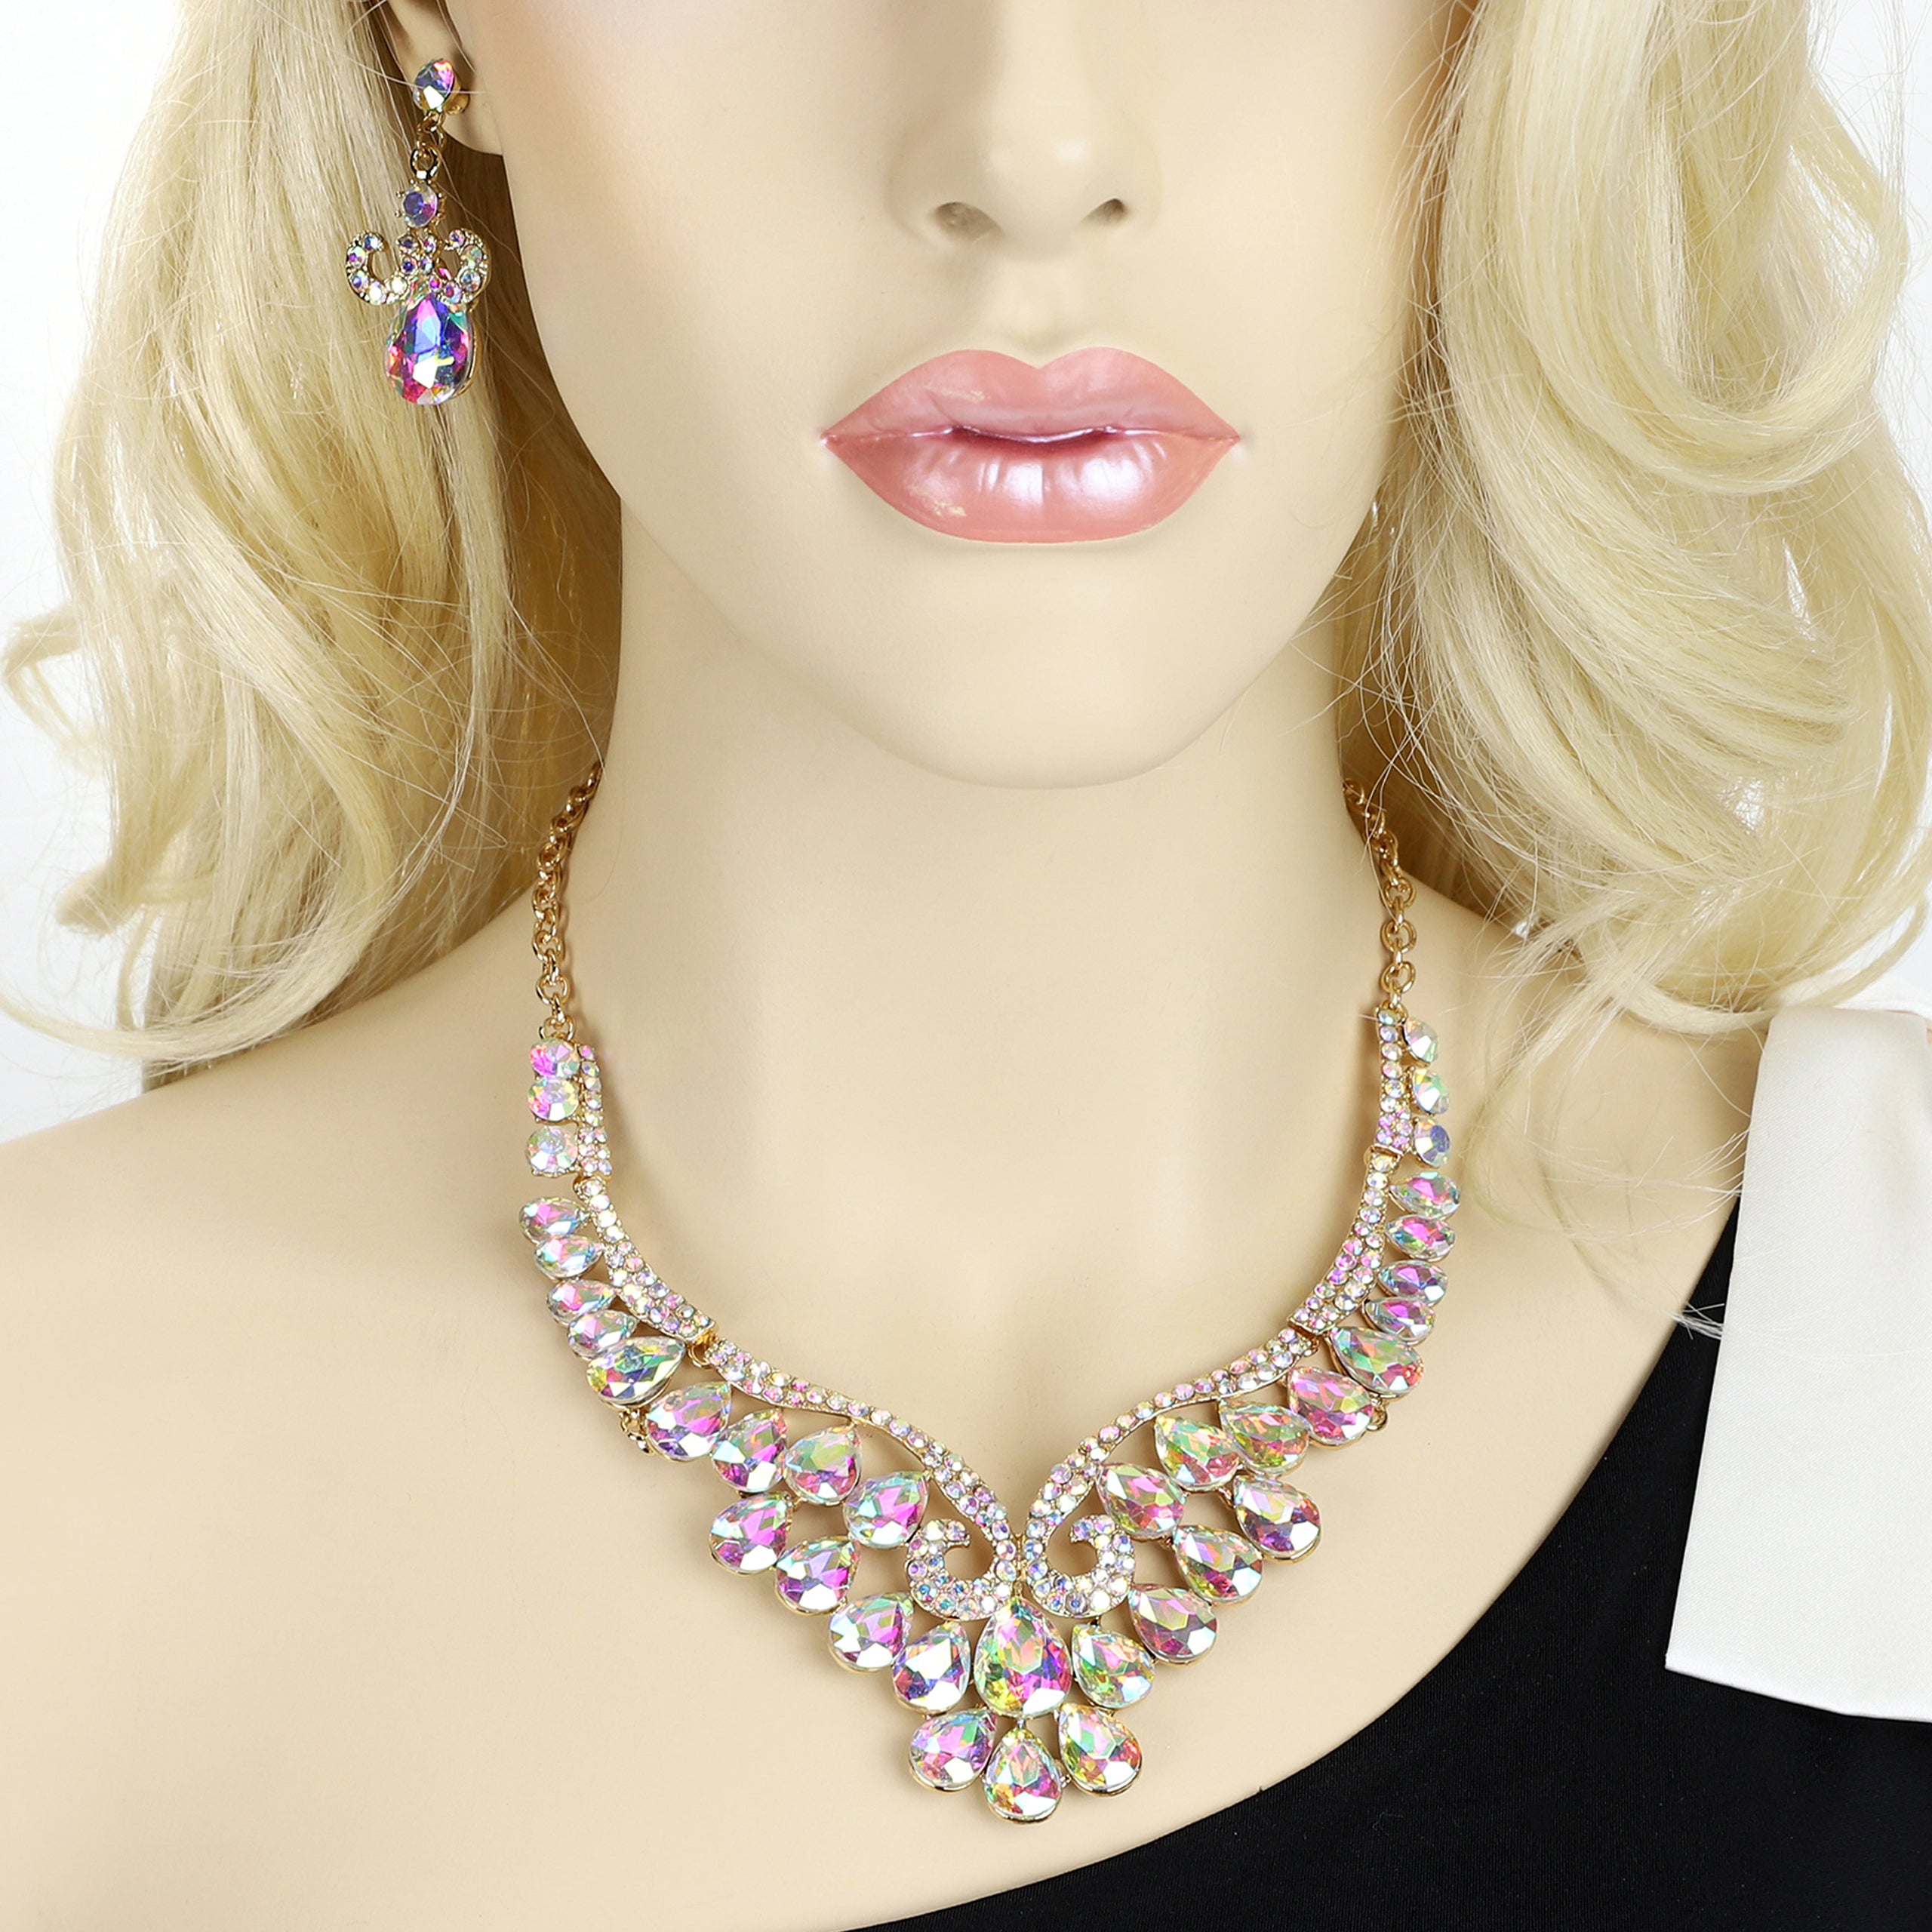 Paparazzi Iridescent Icing Oil Spill Necklace with Earrings | eBay